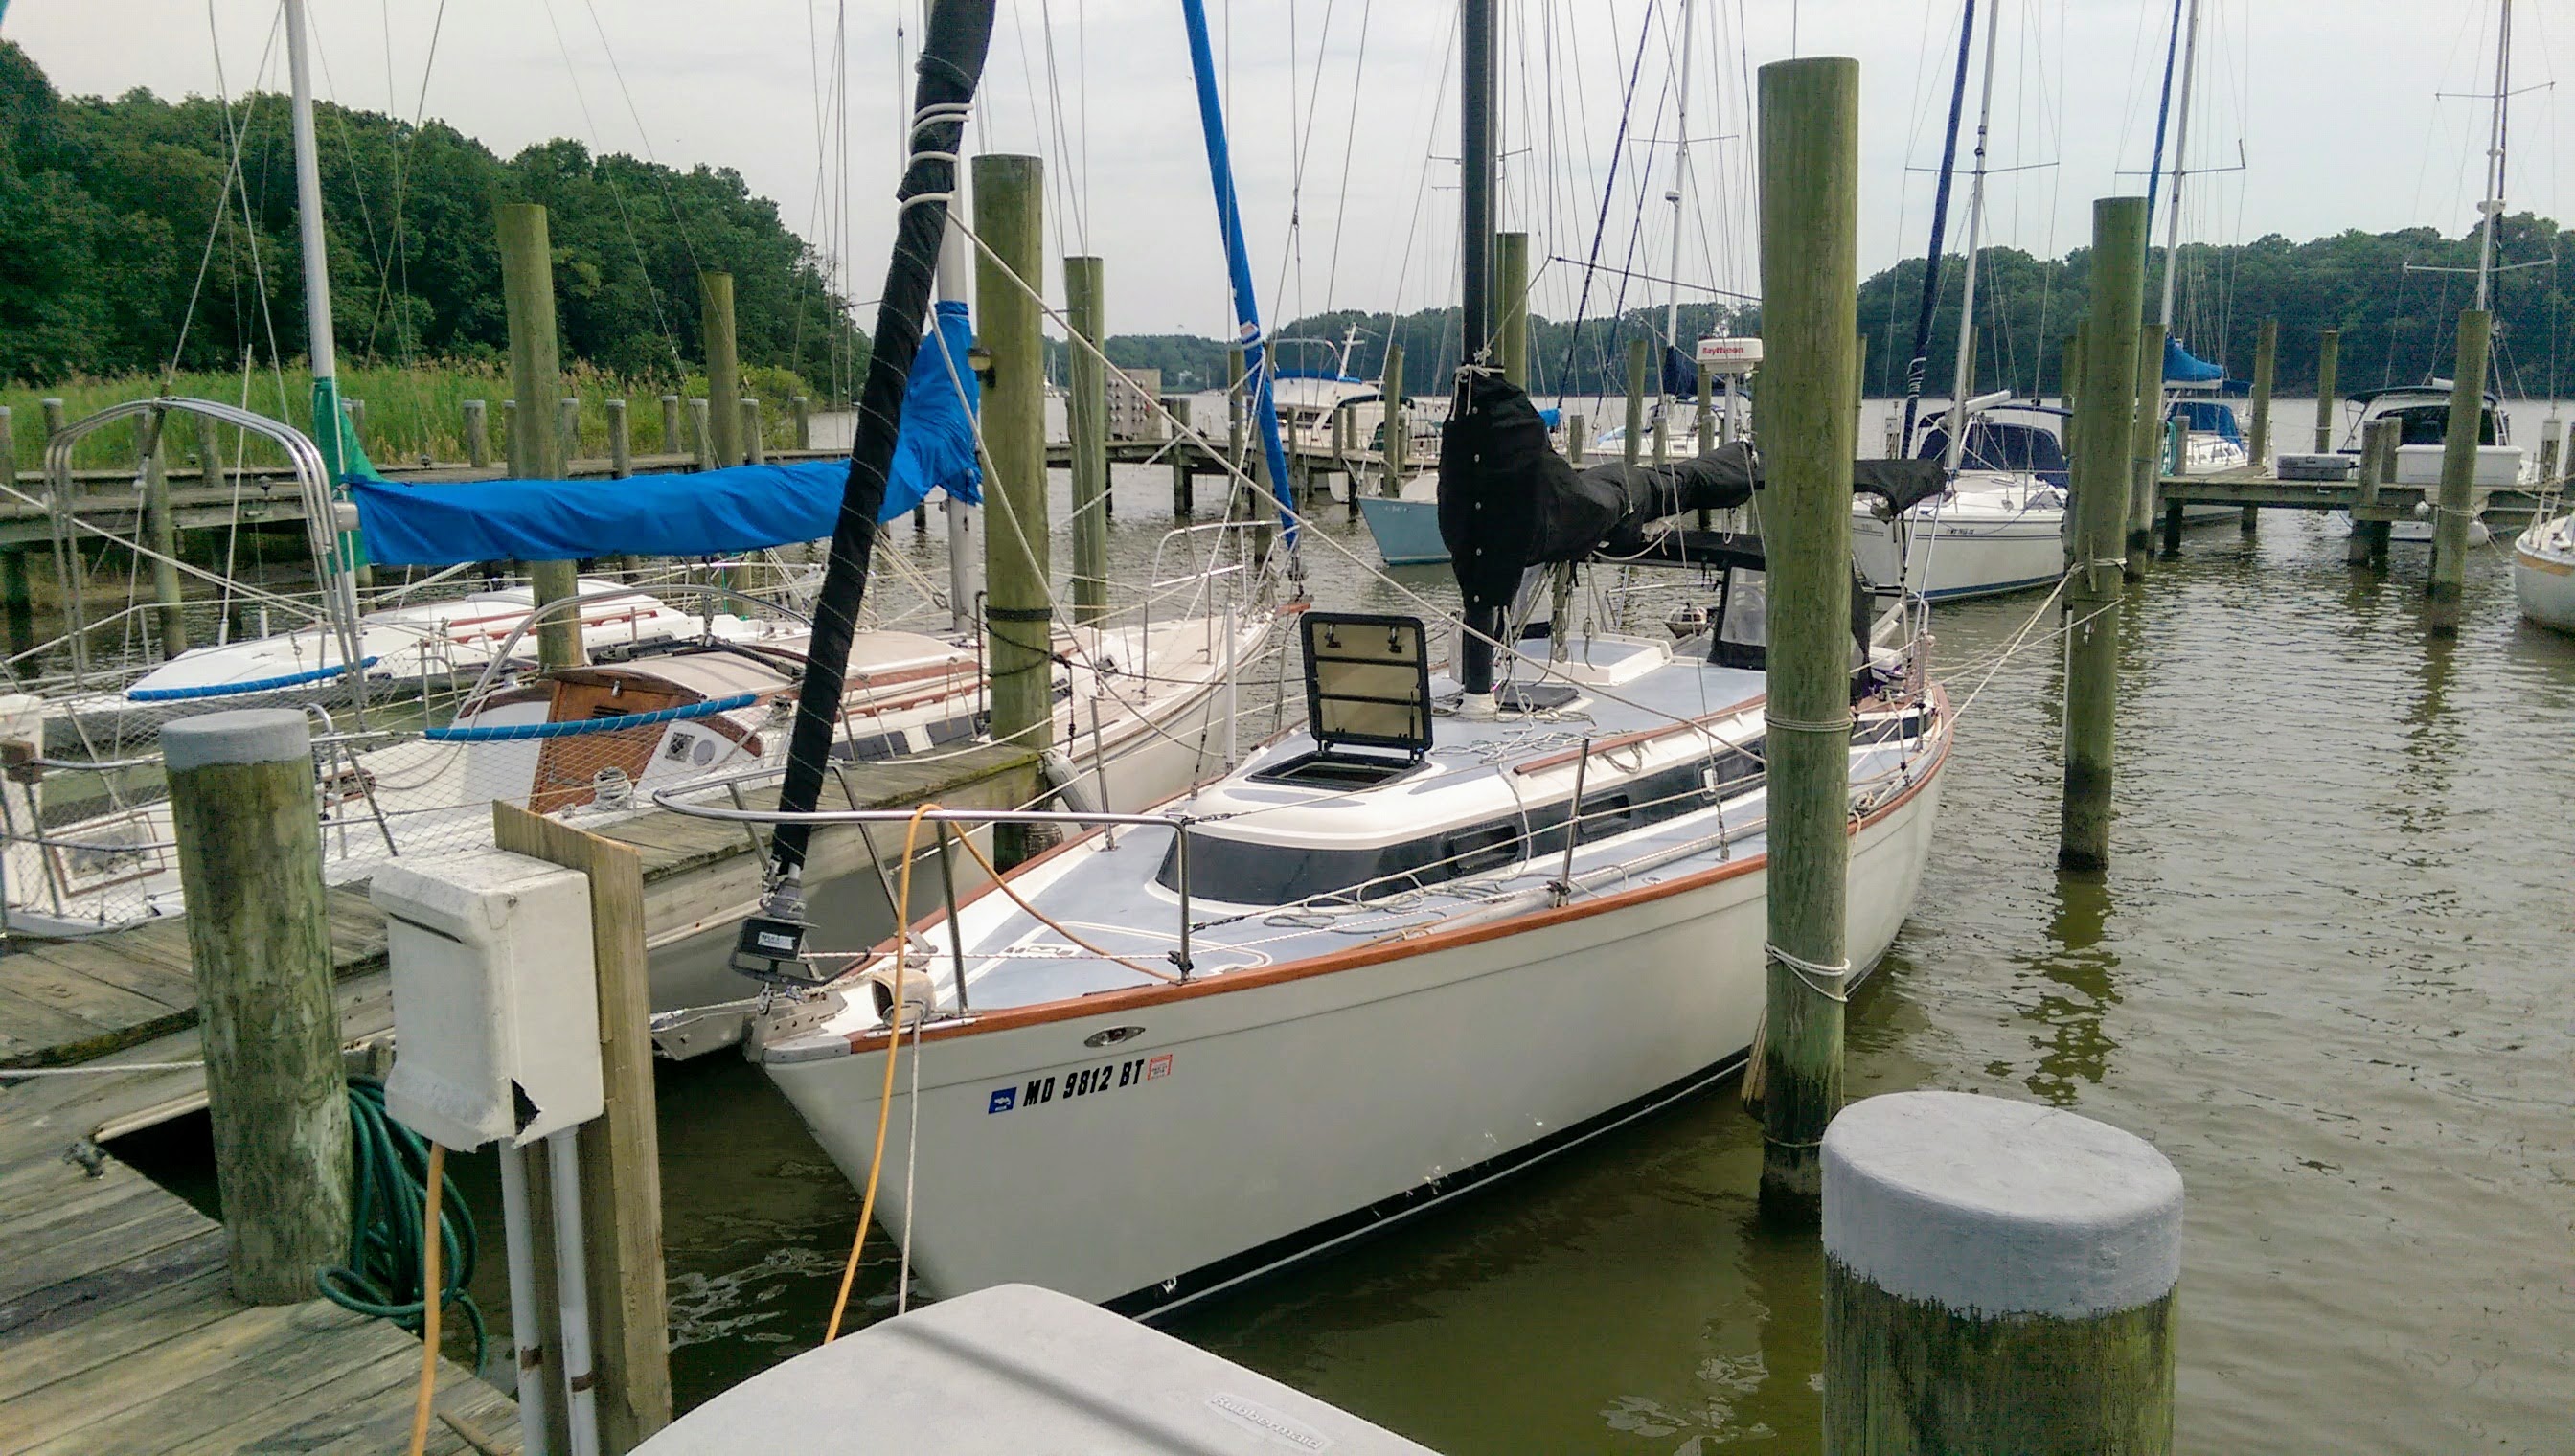 1981 323 foot Pearson Sloop Sailboat for sale in Lynch, MD - image 1 